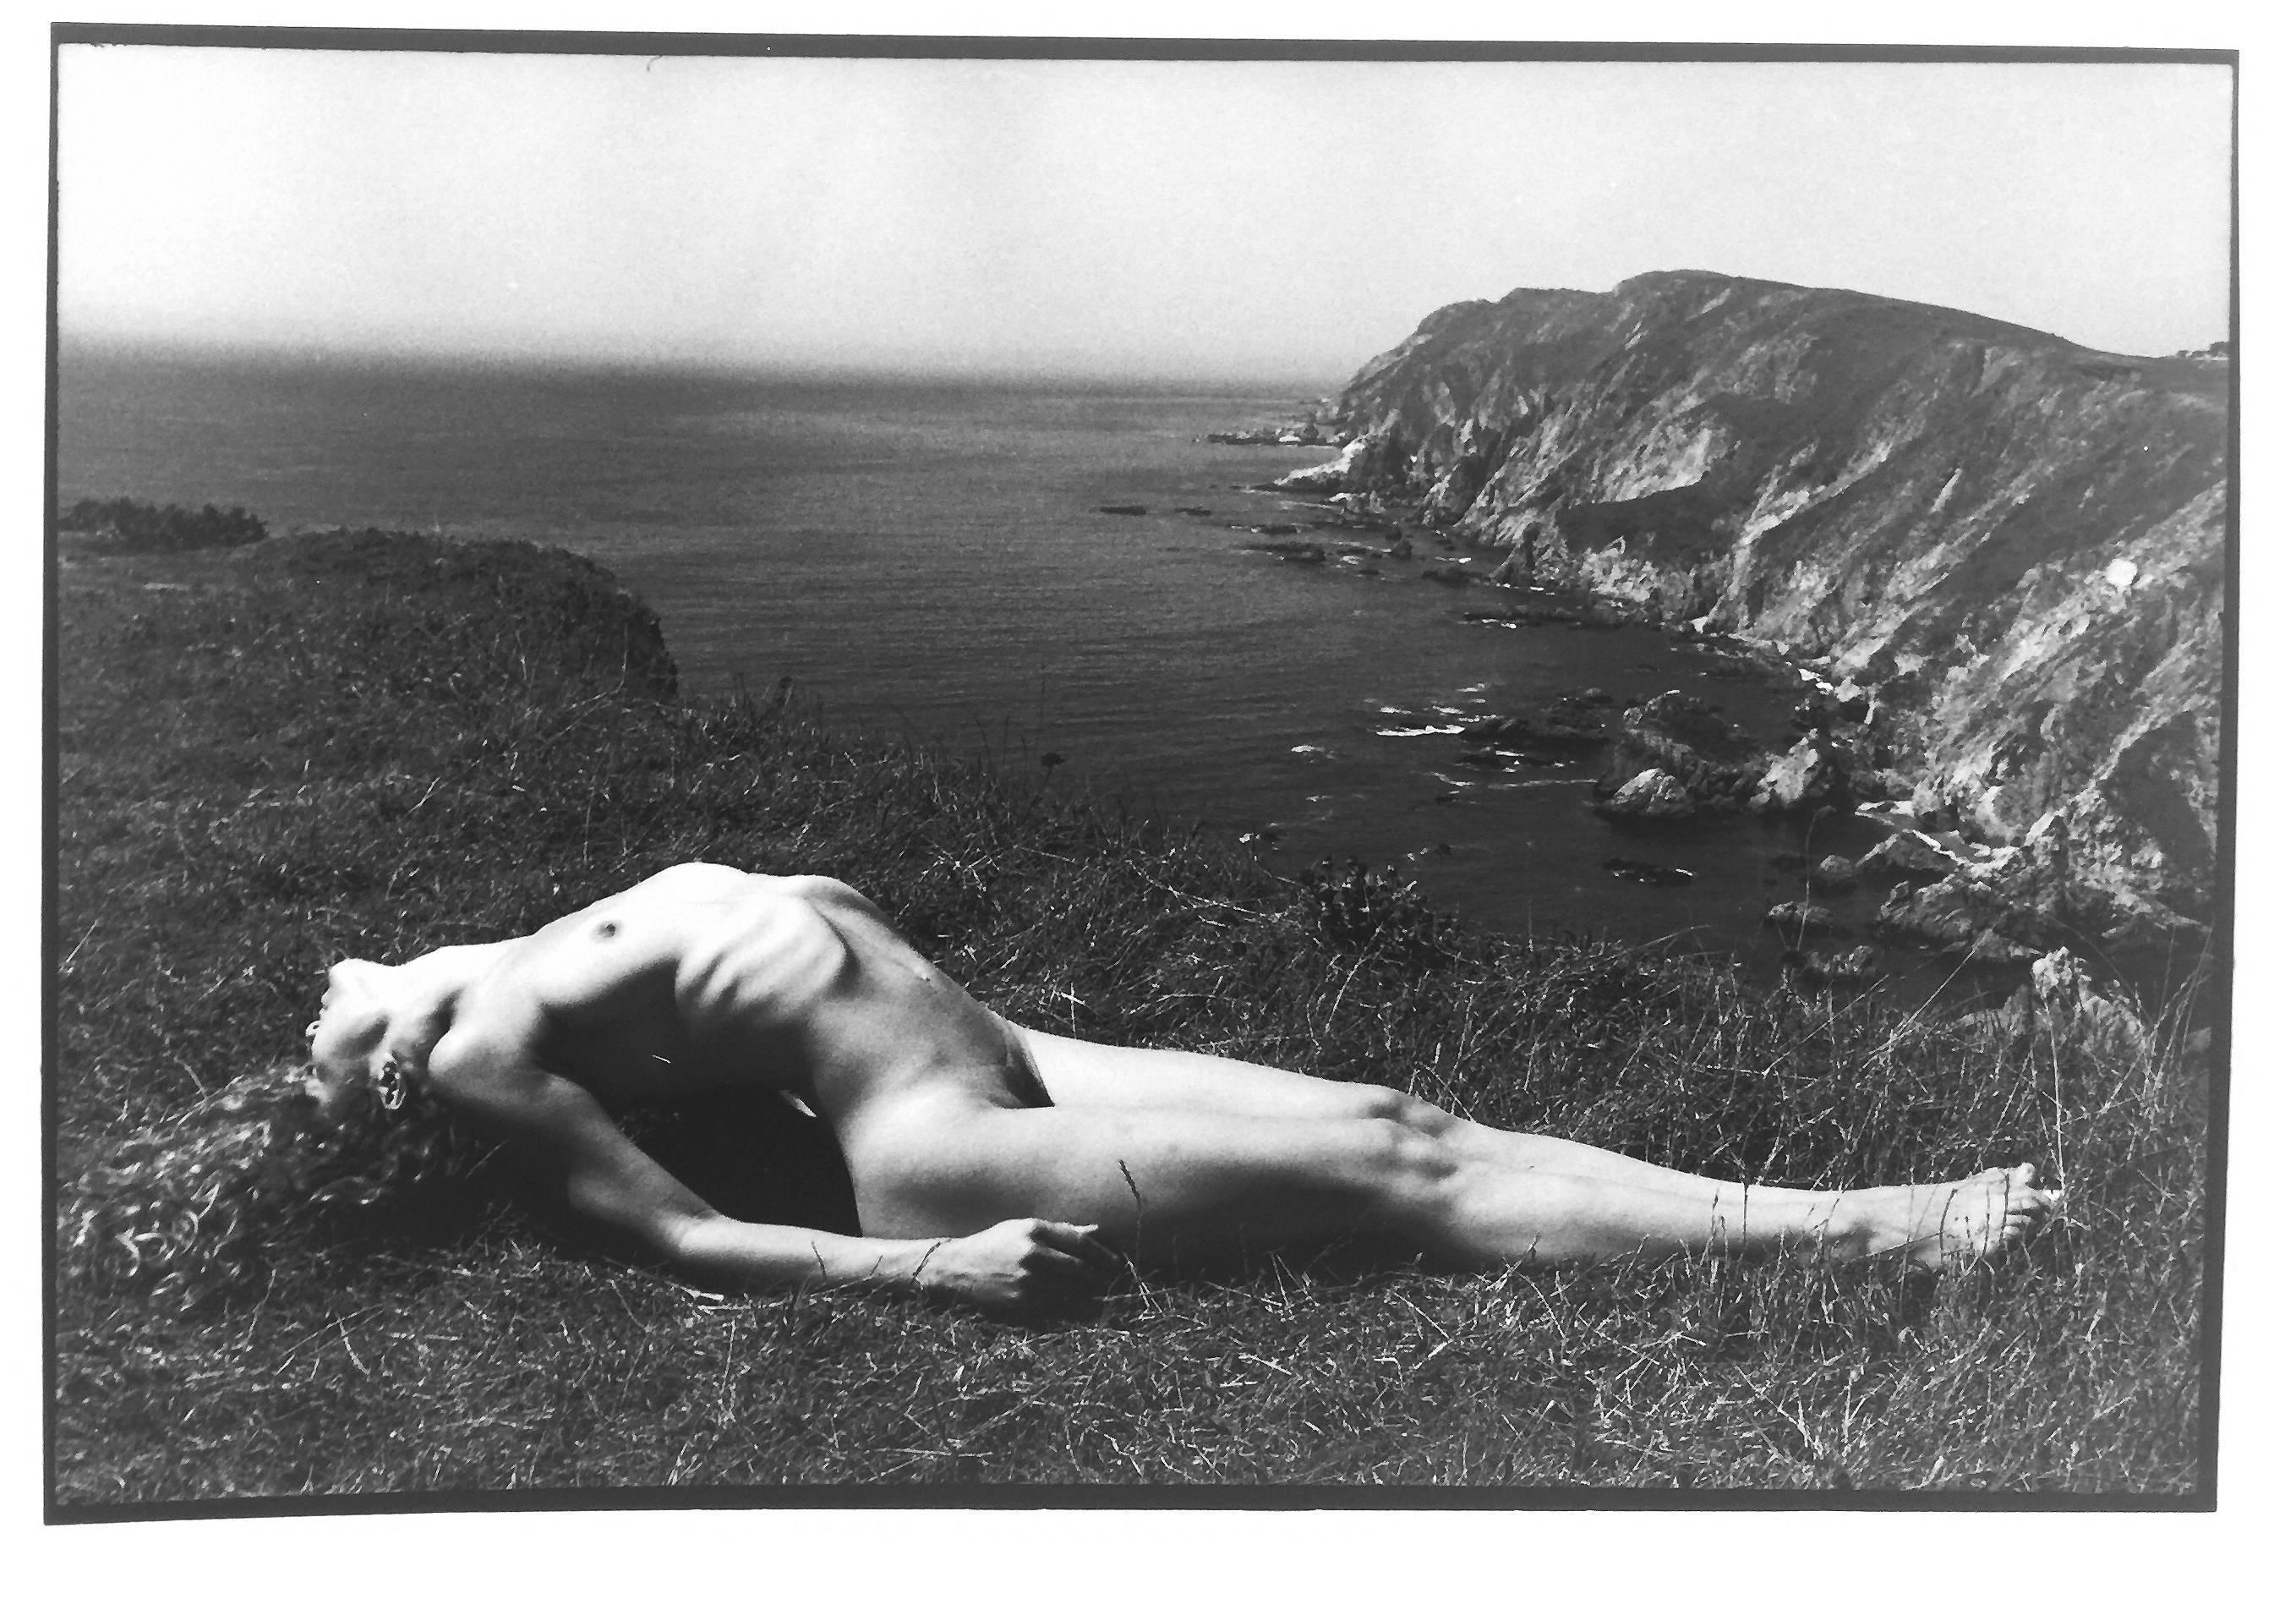 Kate #10, Vintage Black and White Photograph of Nude Yogini